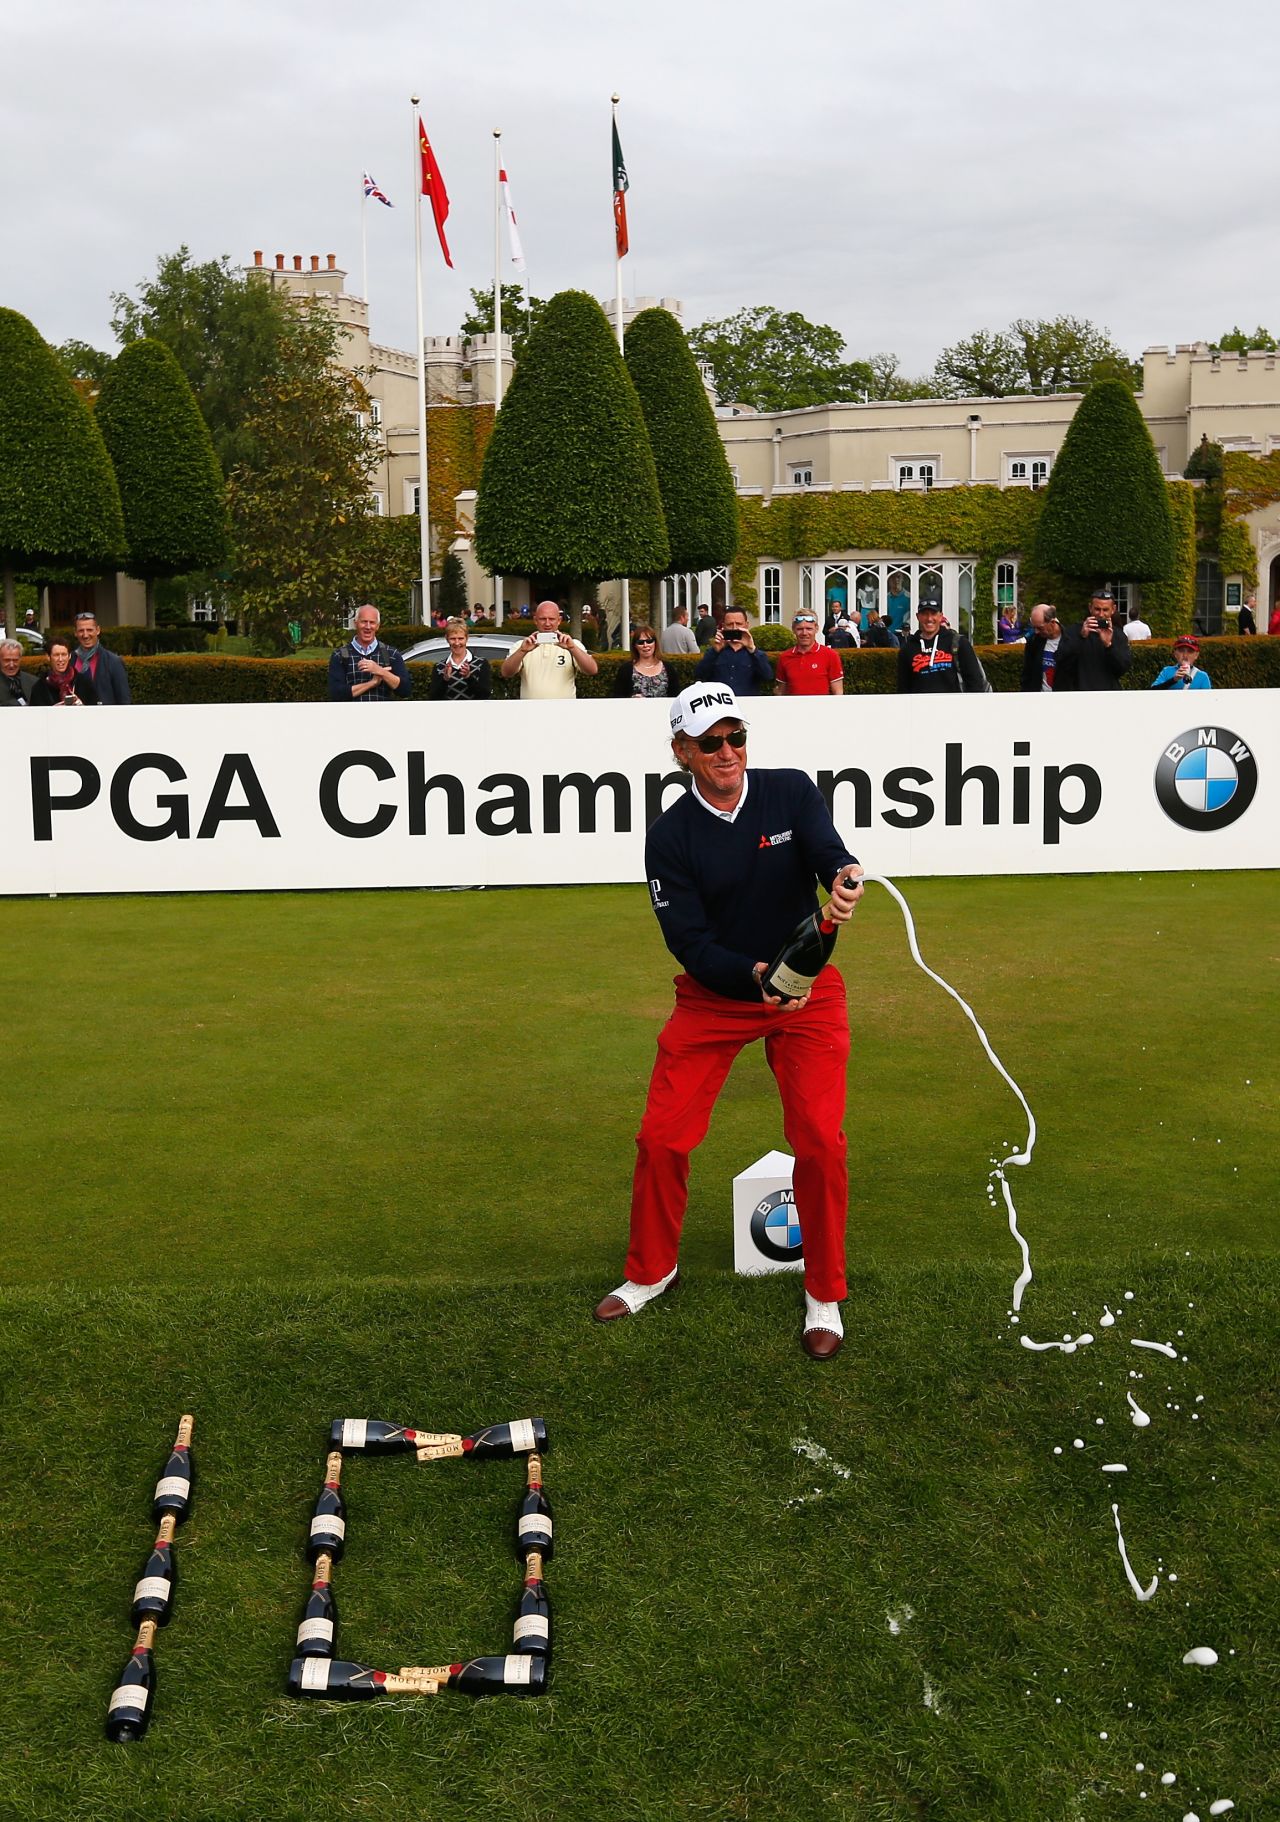 Miguel Angel Jimenez notched up his 10th hole in one in the third round of the BMW PGA Championhip,  setting a European Tour record.